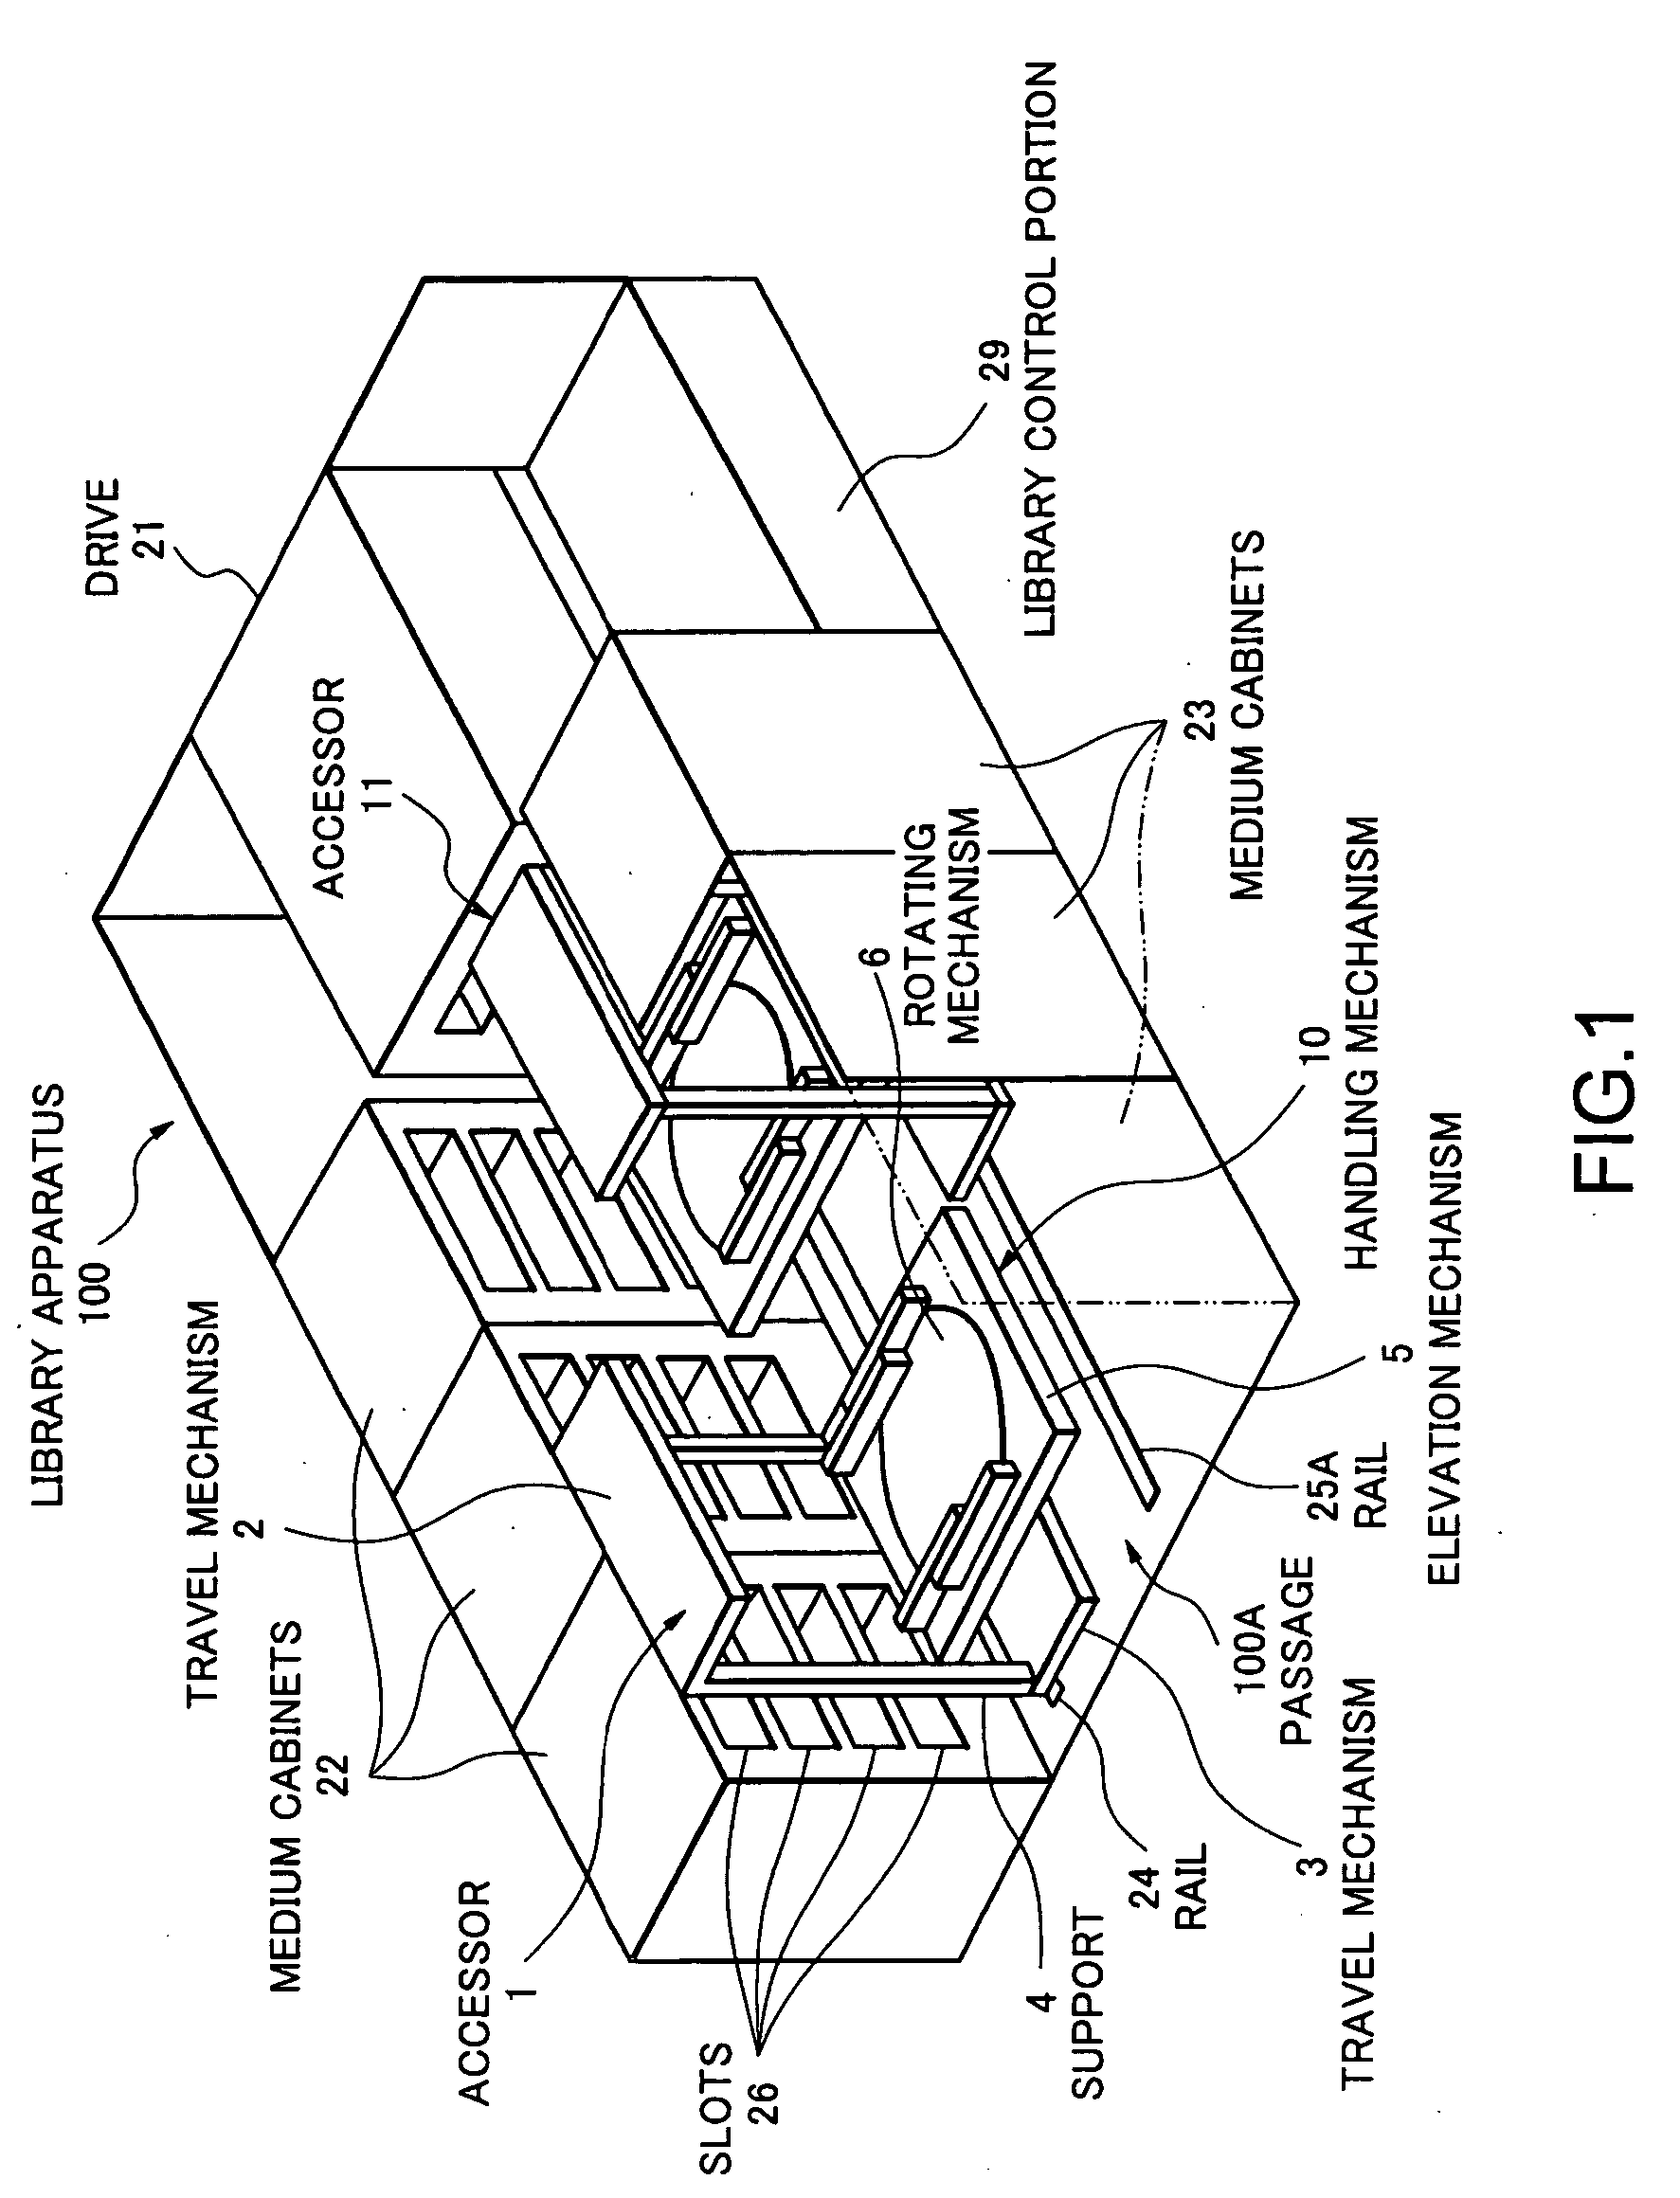 Data storage library and accessor control method